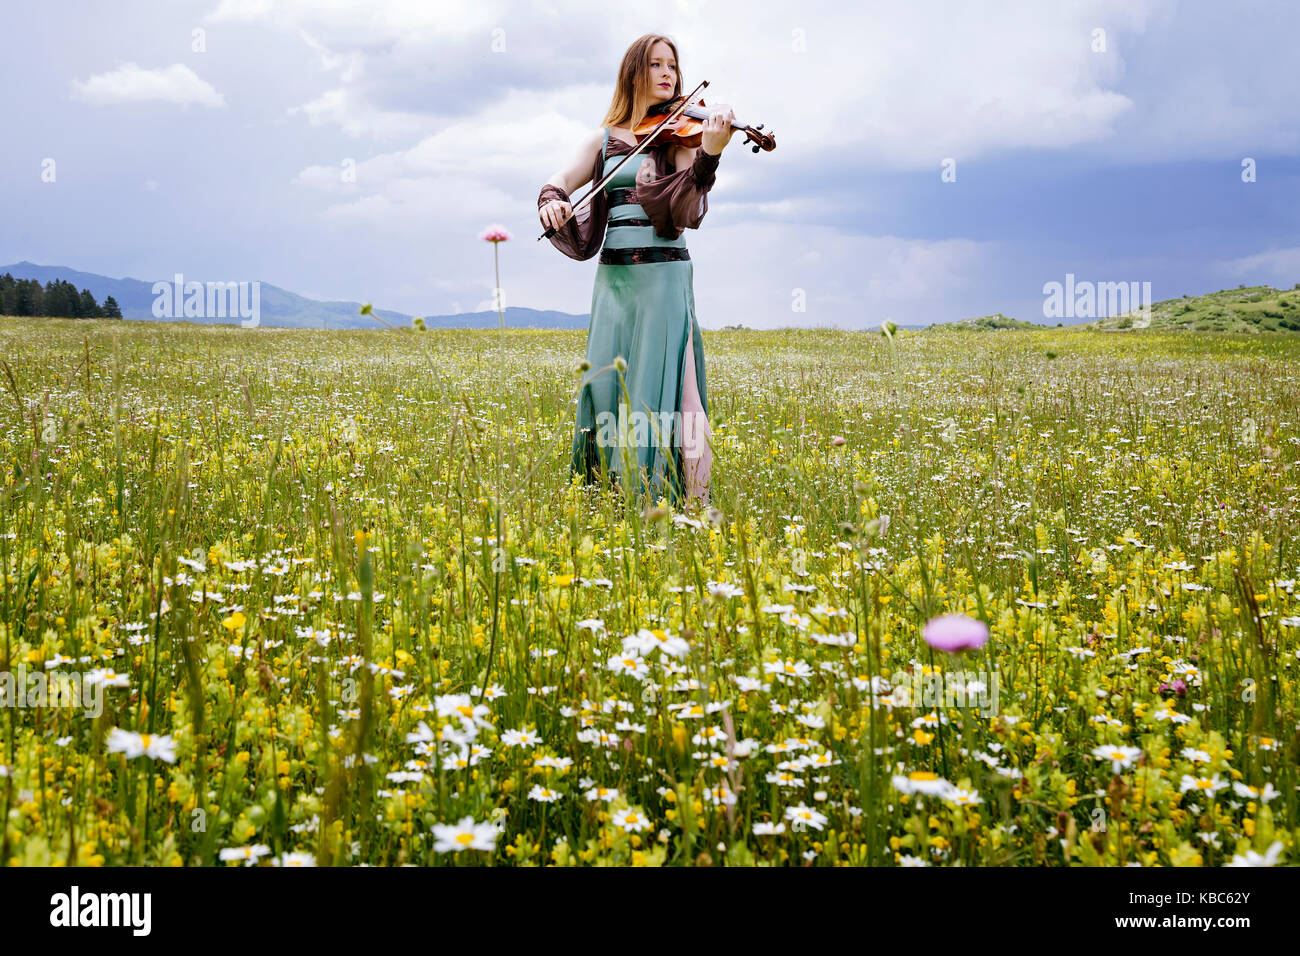 Beautiful female viola player on a wildflower meadow Stock Photo